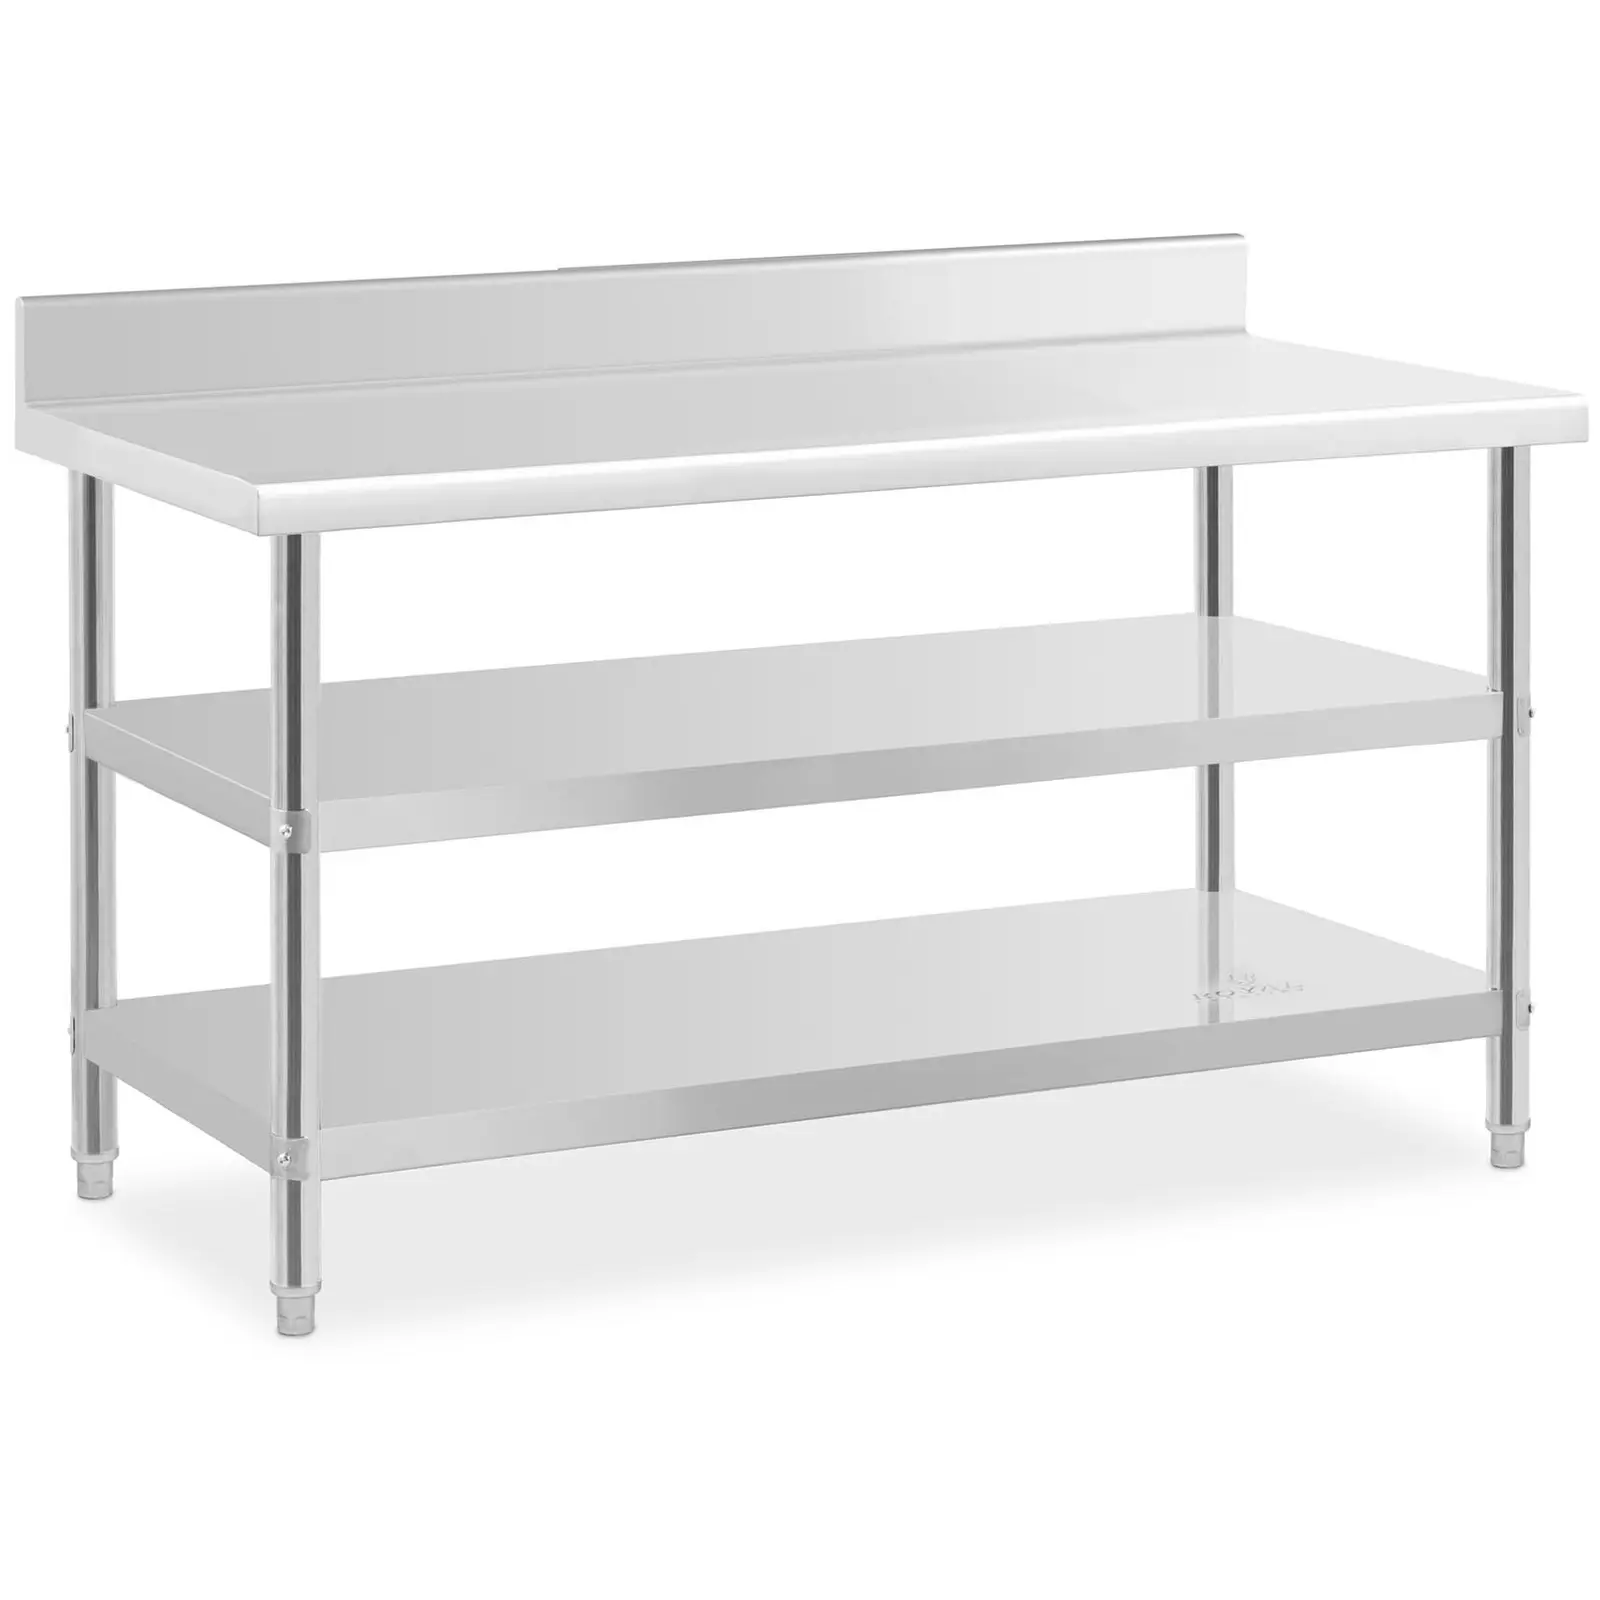 Stainless steel table with backsplash - 150 x 70 x 16.5 cm - 226 kg - 2 shelves - Royal Catering